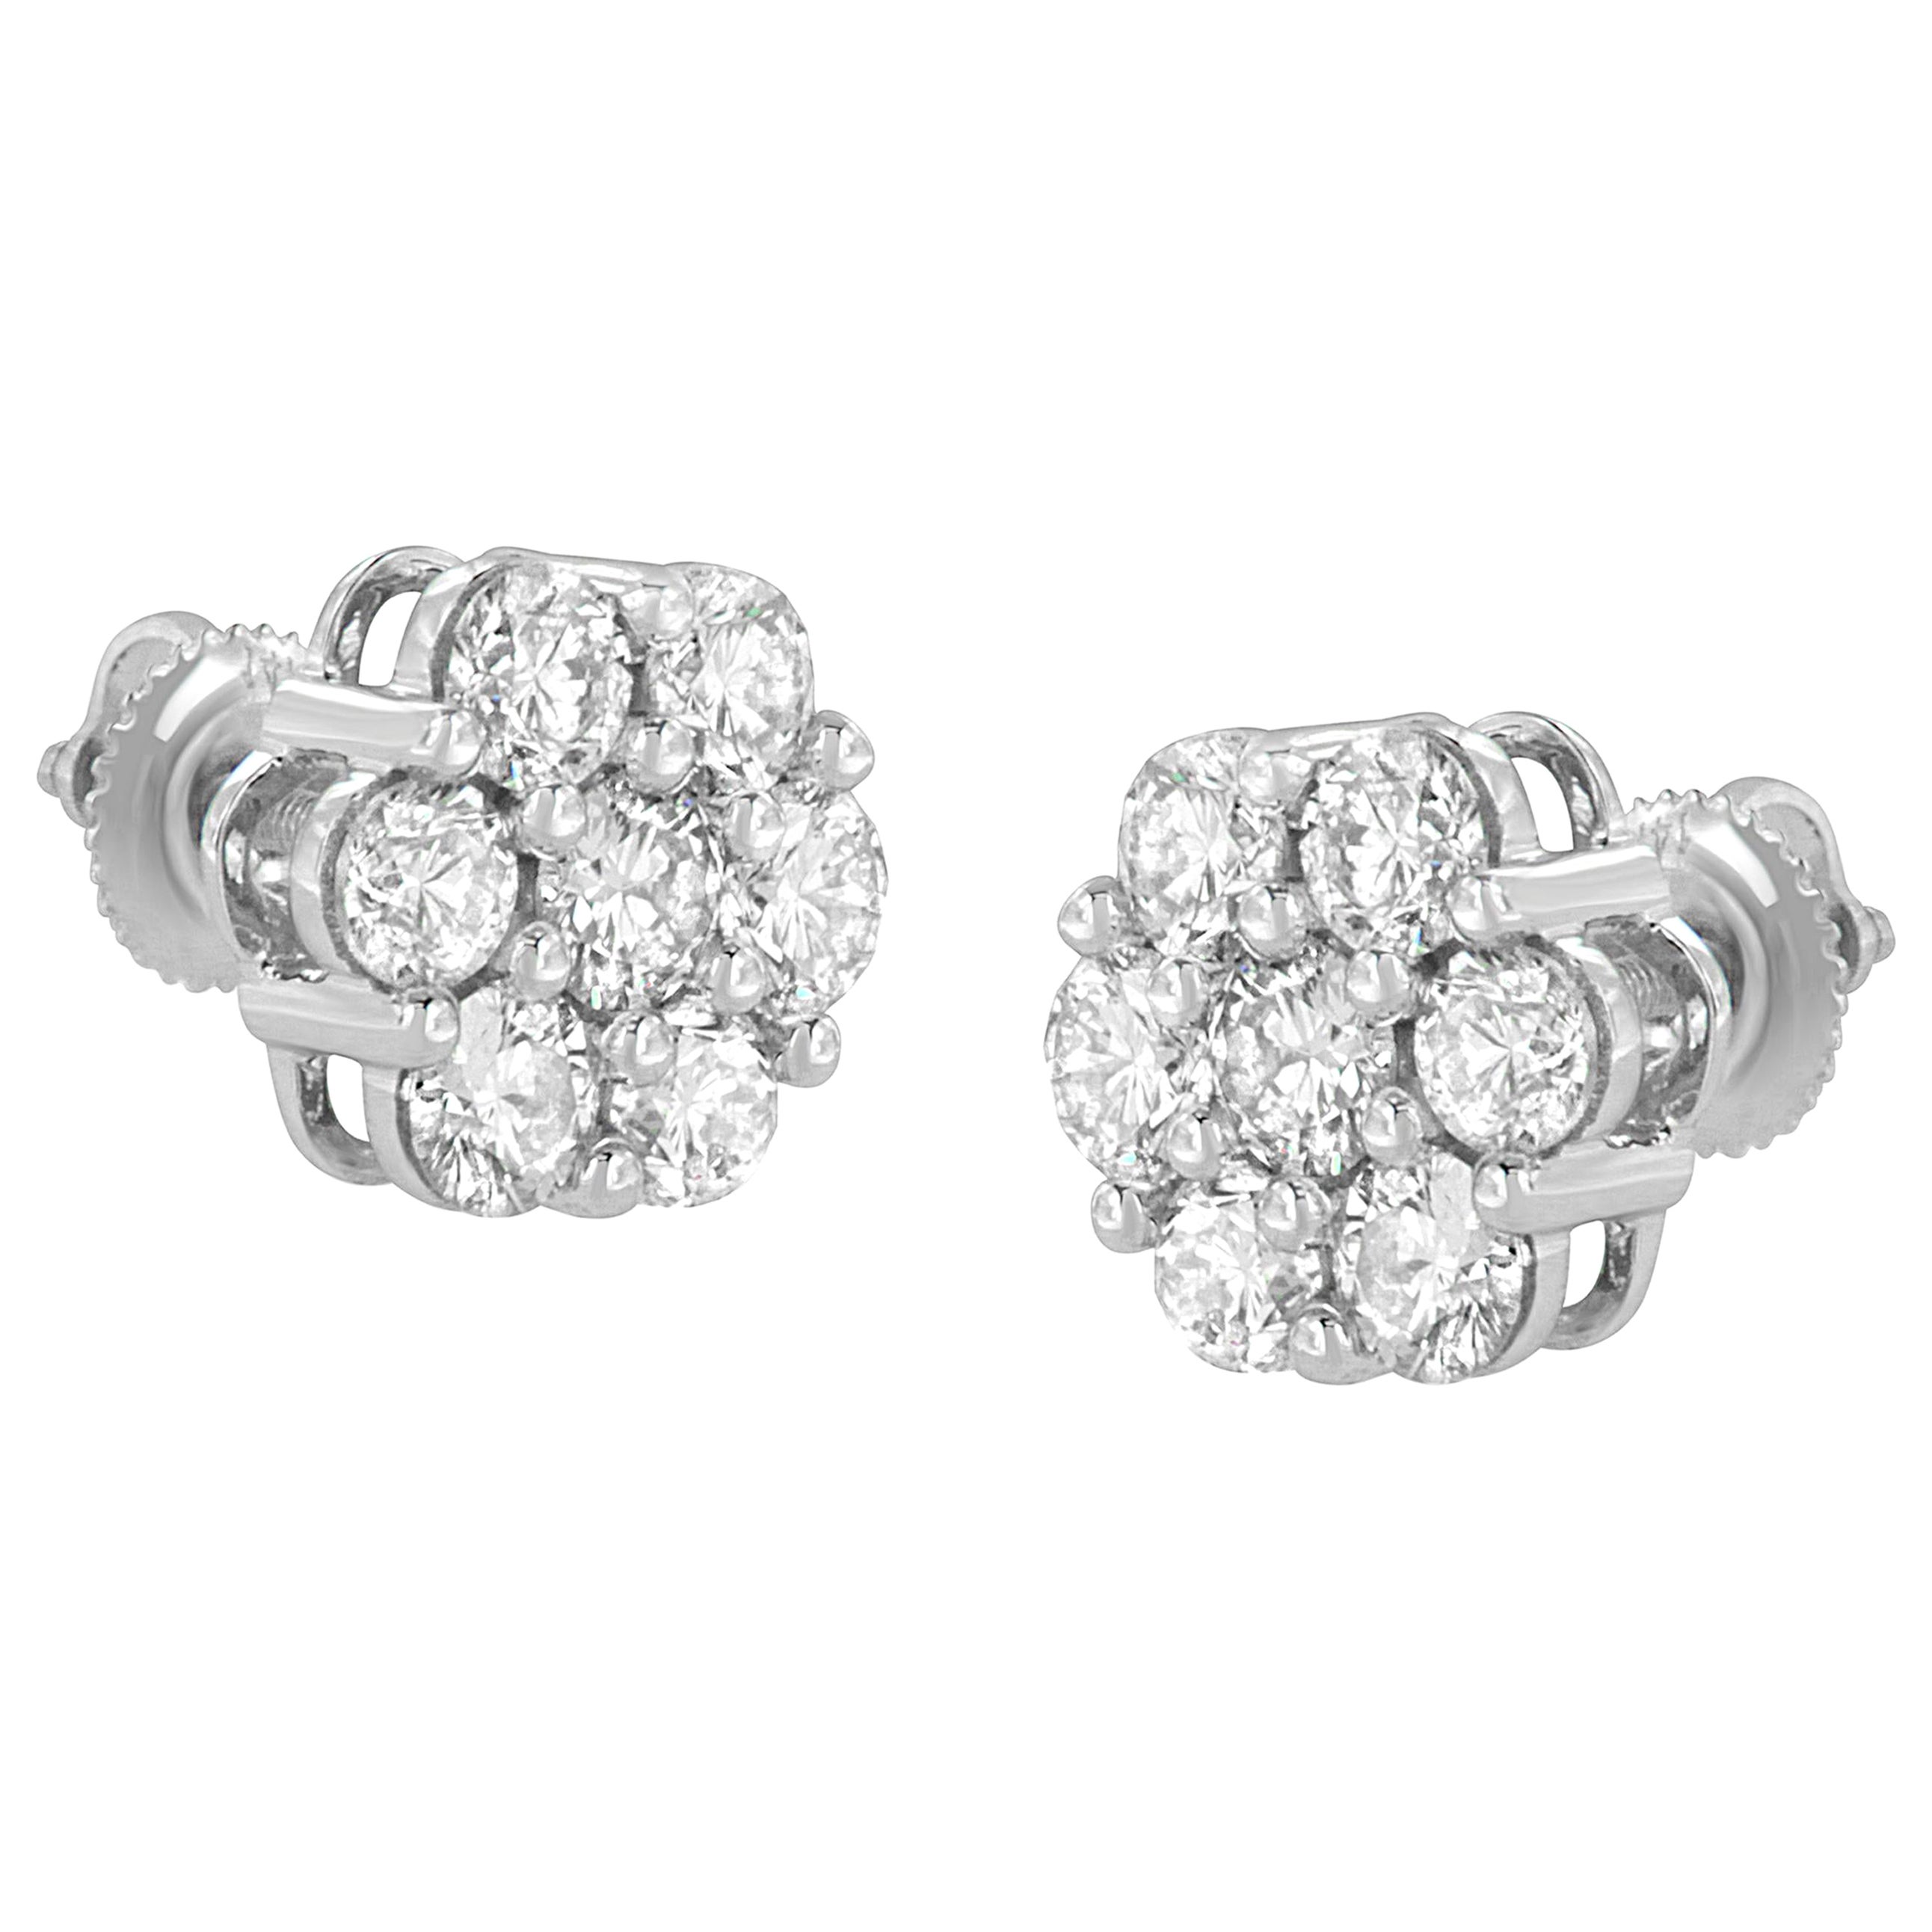 14K White Gold 3.0 Carat Round-Cut Diamond Floral Cluster Stud Earring For Sale